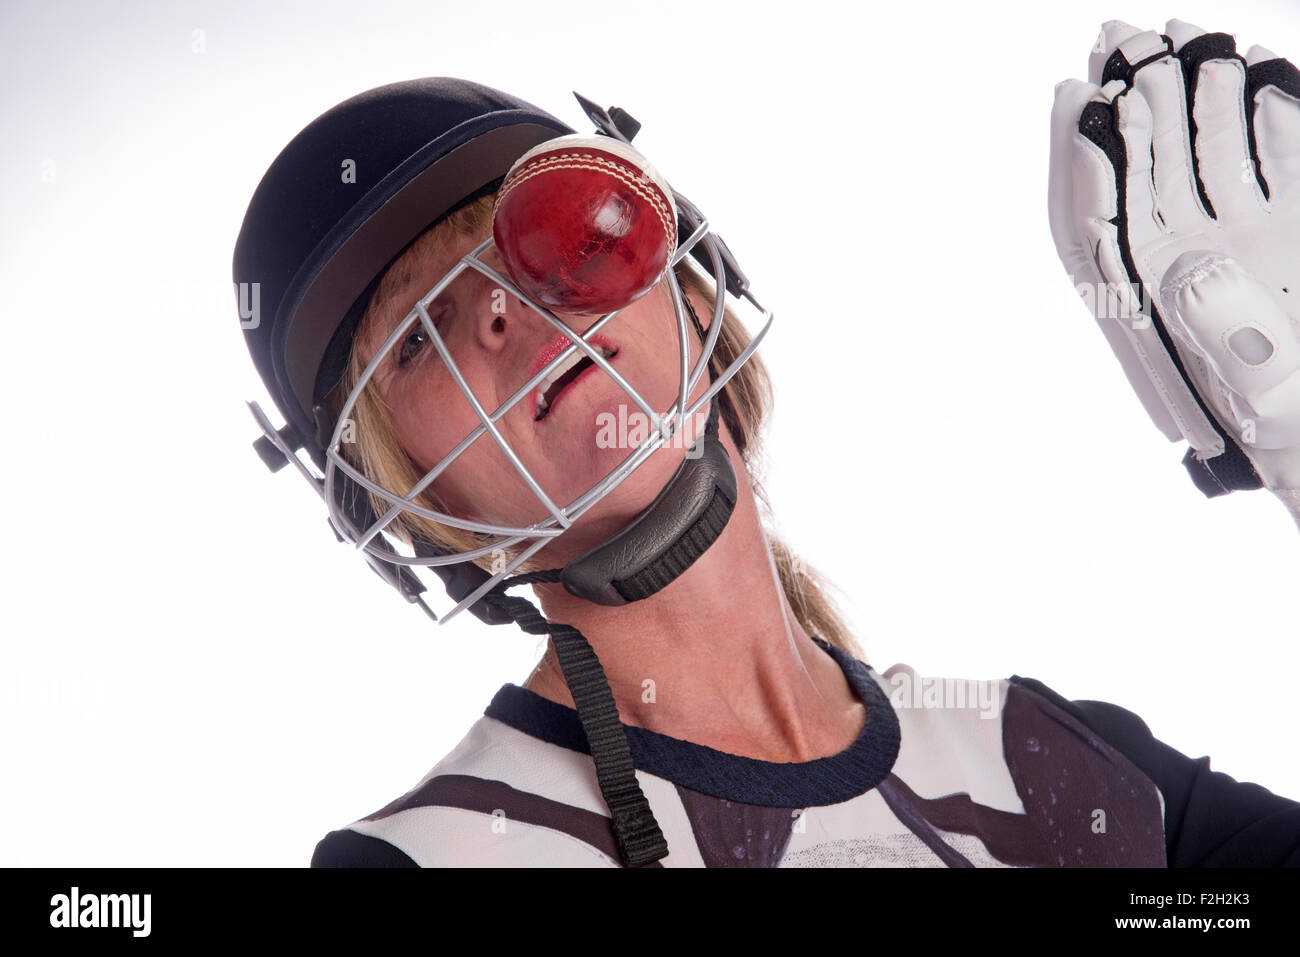 Cricketer wearing safety helmet being hit by a cricket ball Stock Photo